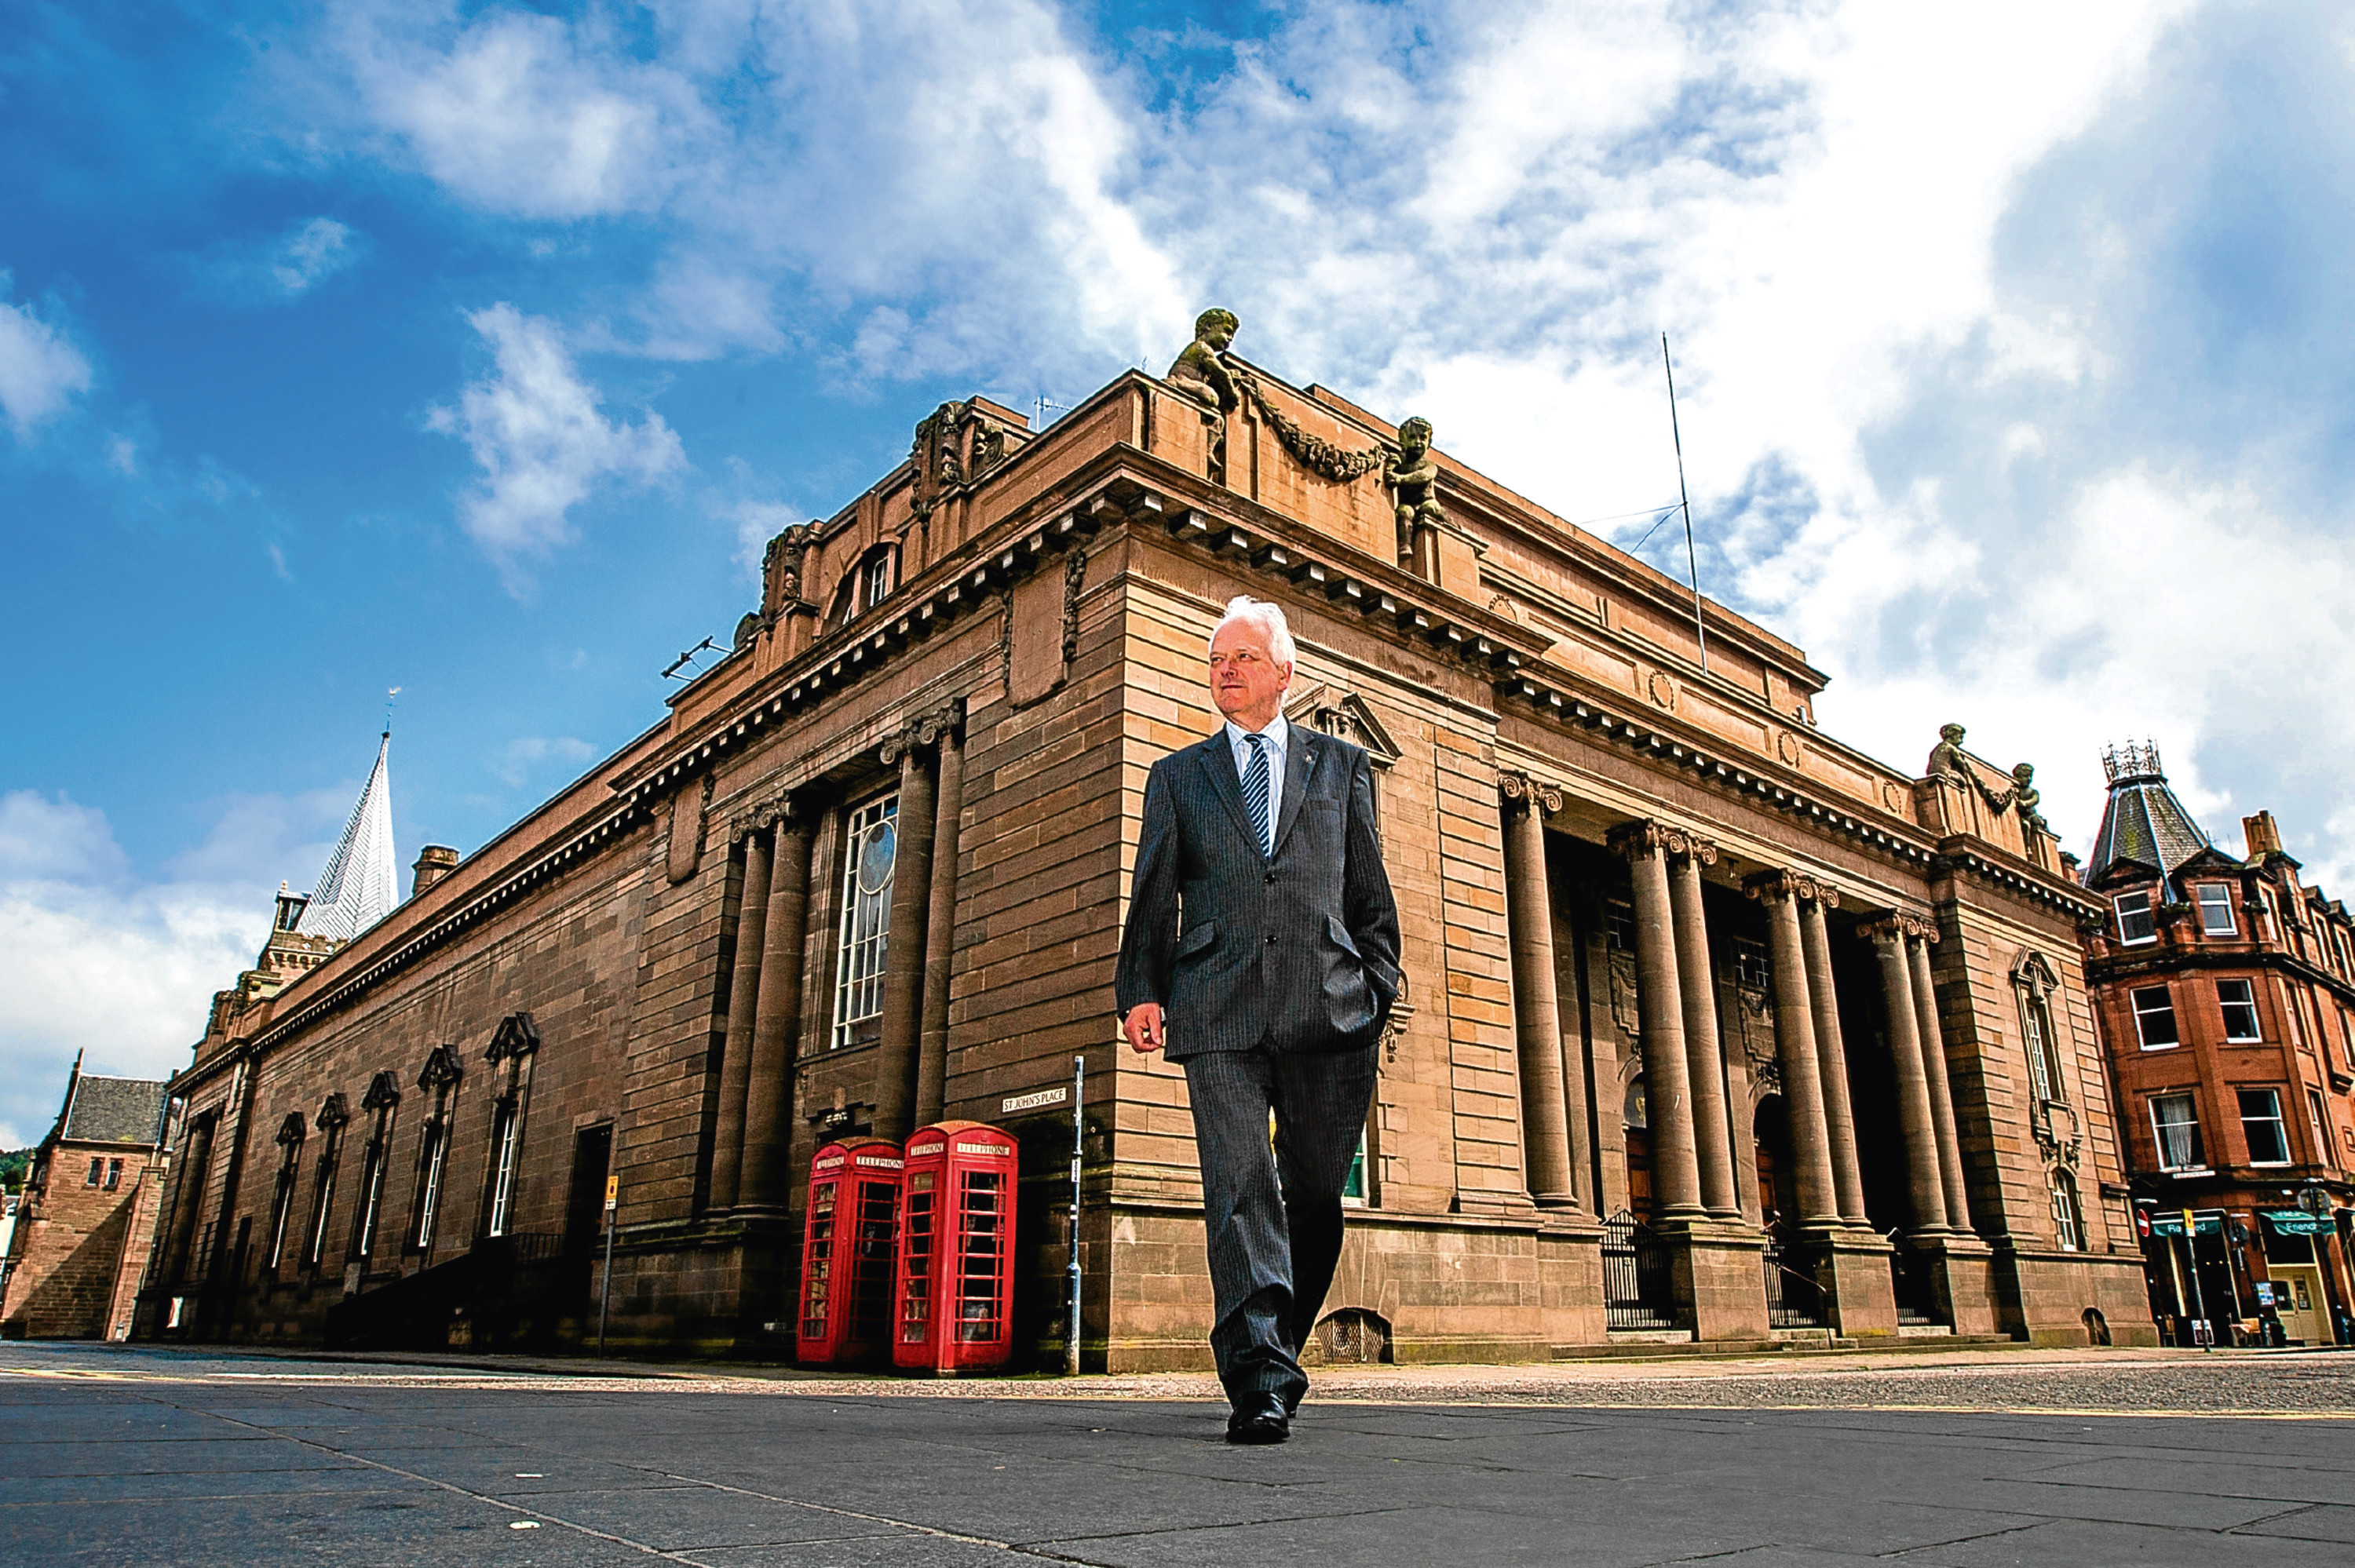 Perth and Kinross Council leader Ian Miller at Perth City Hall.